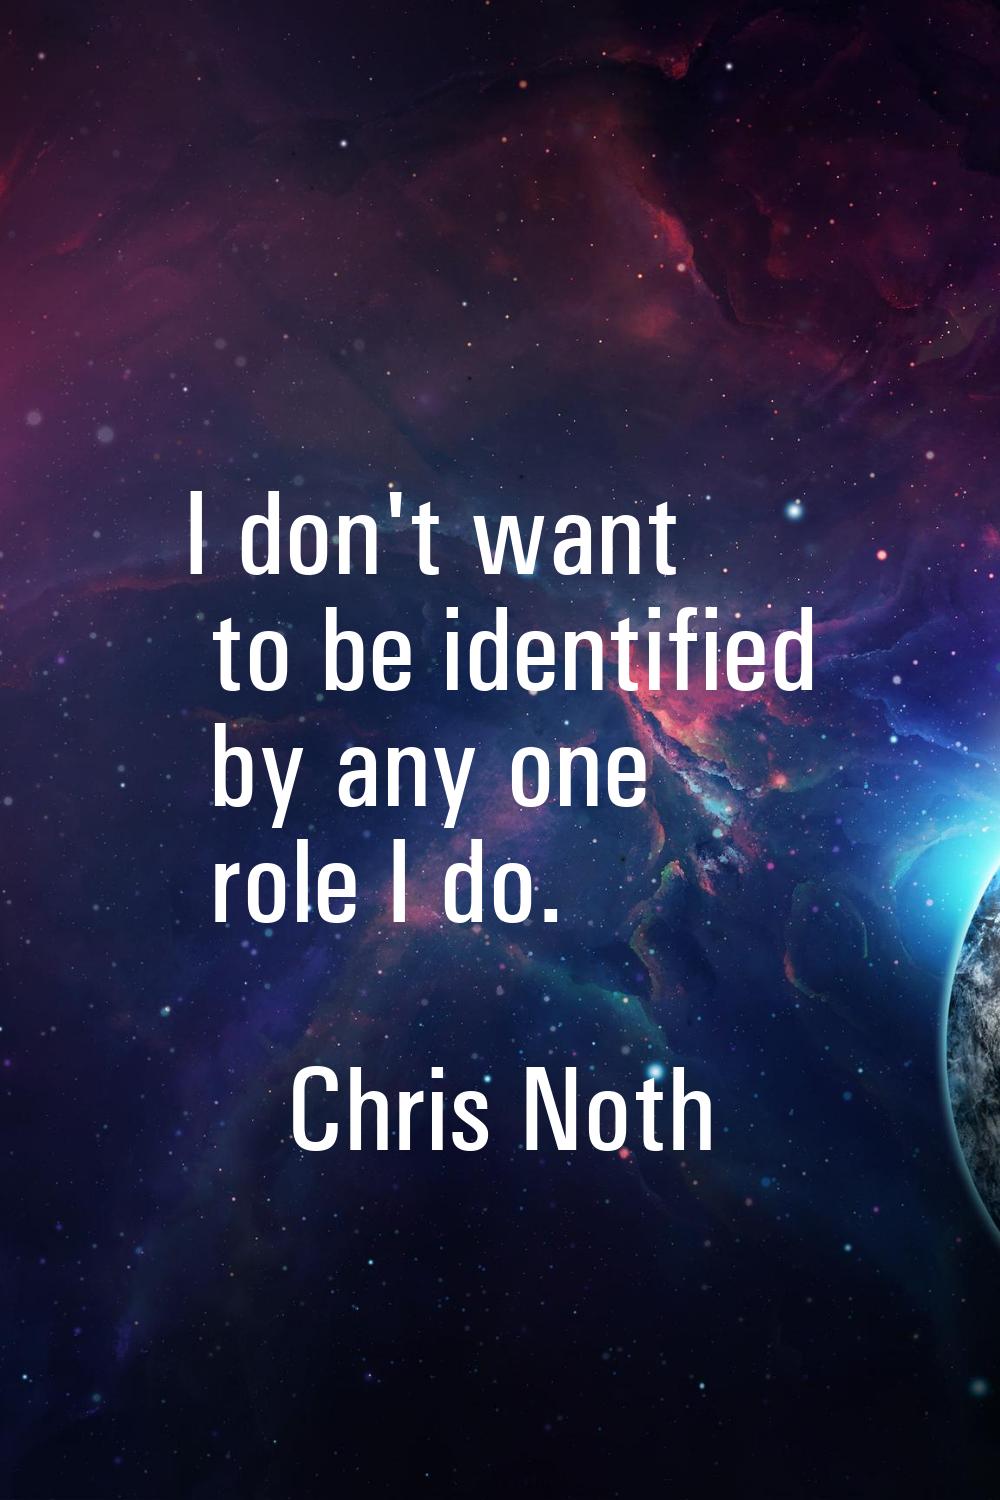 I don't want to be identified by any one role I do.